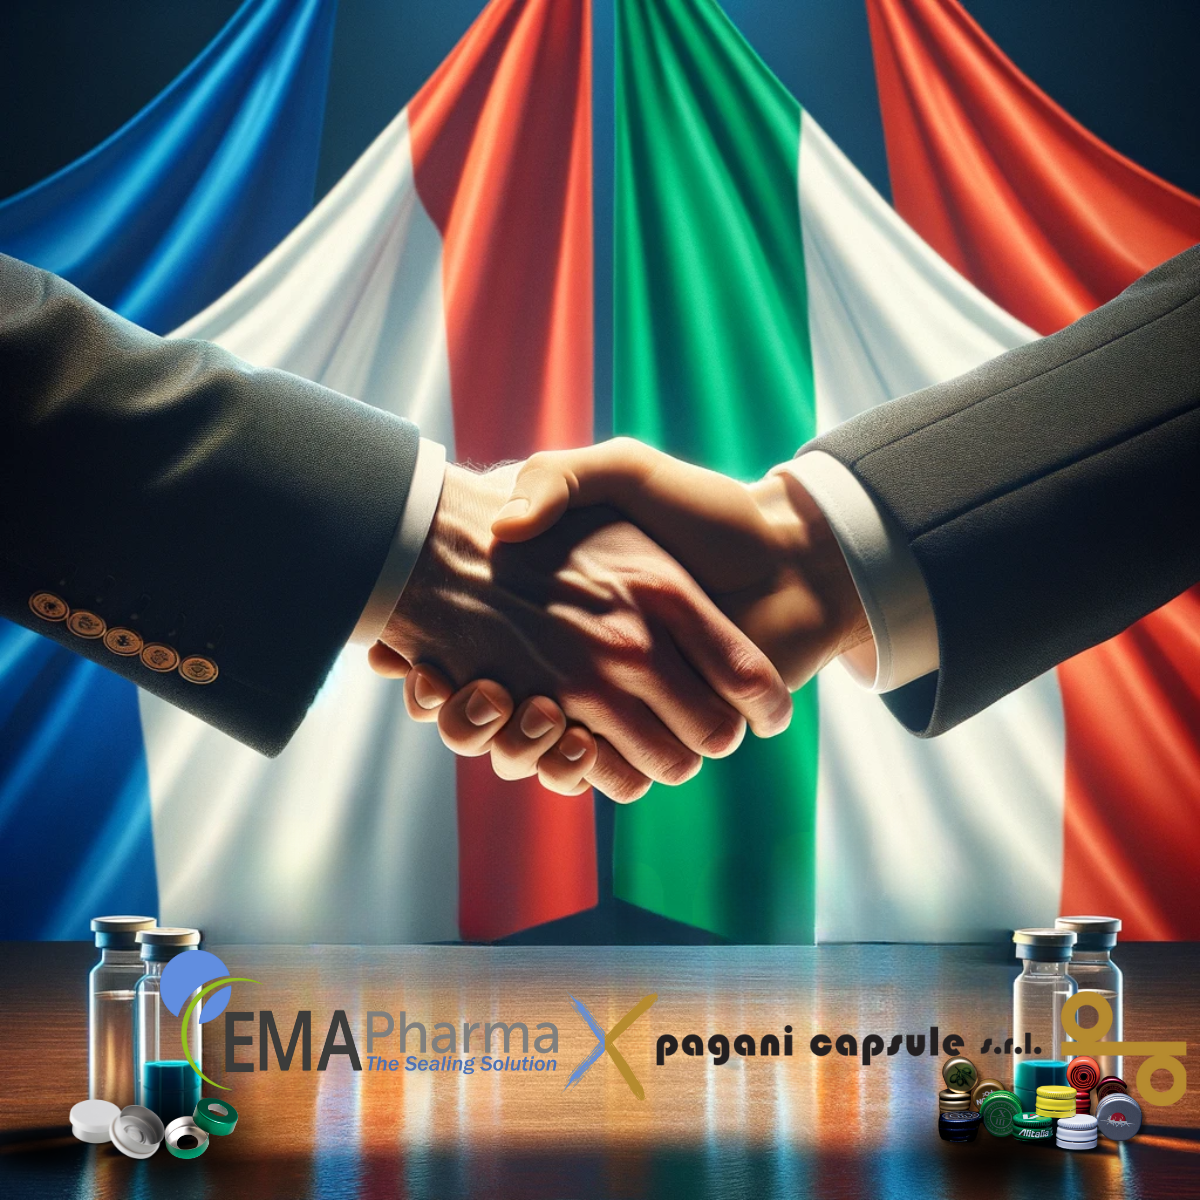 French and Italian flags with handshake signifying partnership between pagani capsule and EMA Pharmaceuticals 